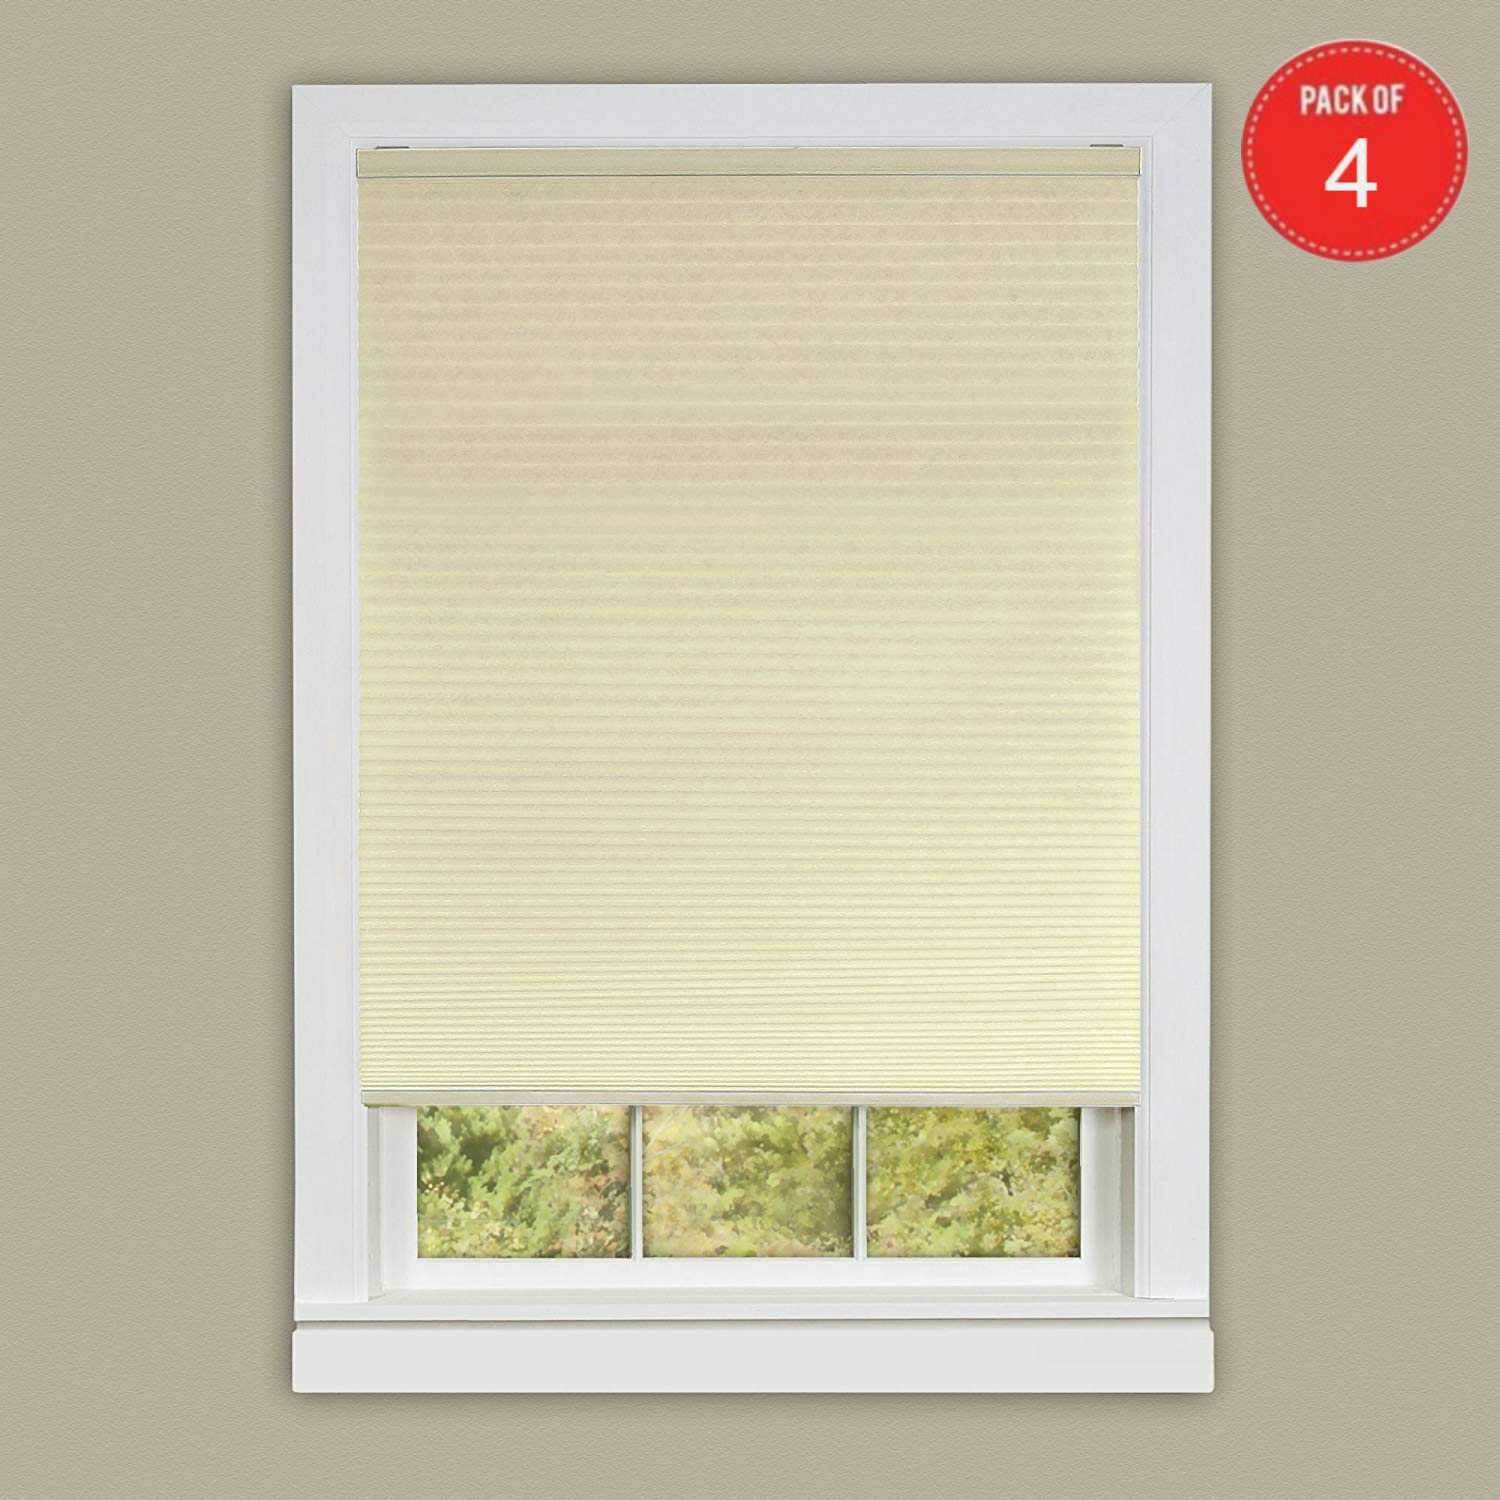 Achim Home Furnishings Honeycomb Pleated Cordless Window Shade, 33 by 64-Inch, Alabaster (Pack of 4)